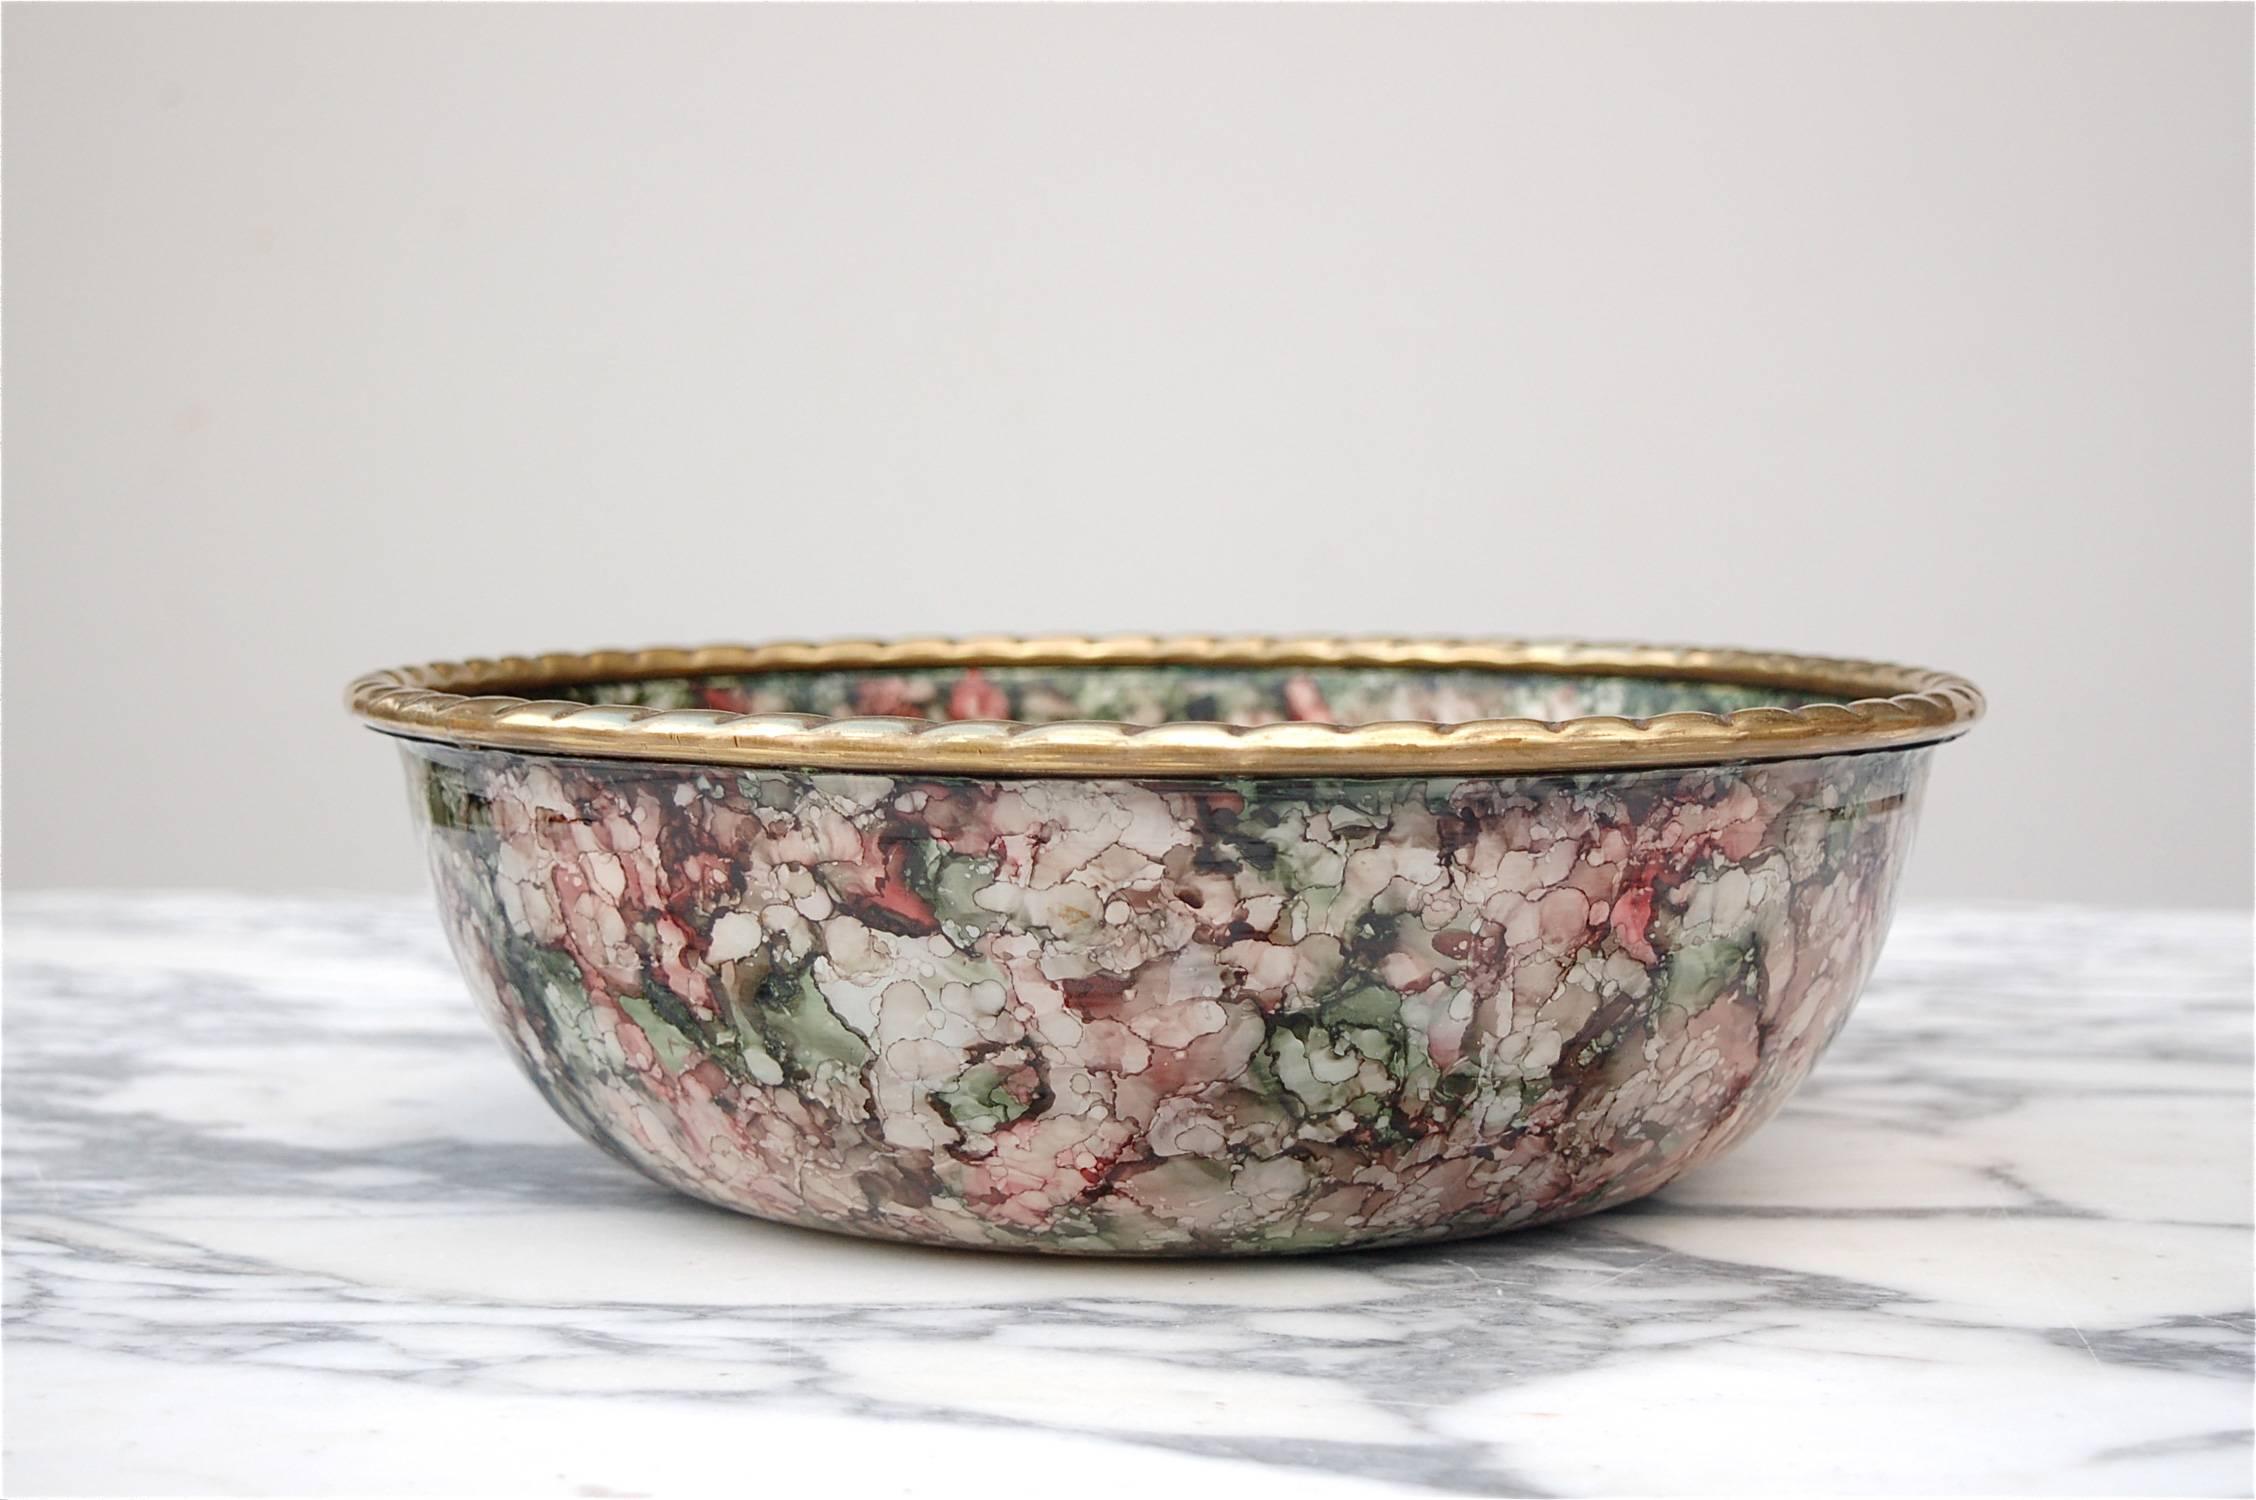 A solid brass bowl or dish with enamel decoration and twisted rope style rim. Unlike cloisonné, the bowl is decorated in a very fluid, freehand style of enameling resembling a smooth blend of multicolored watercolor splashes or even mosaic inlay